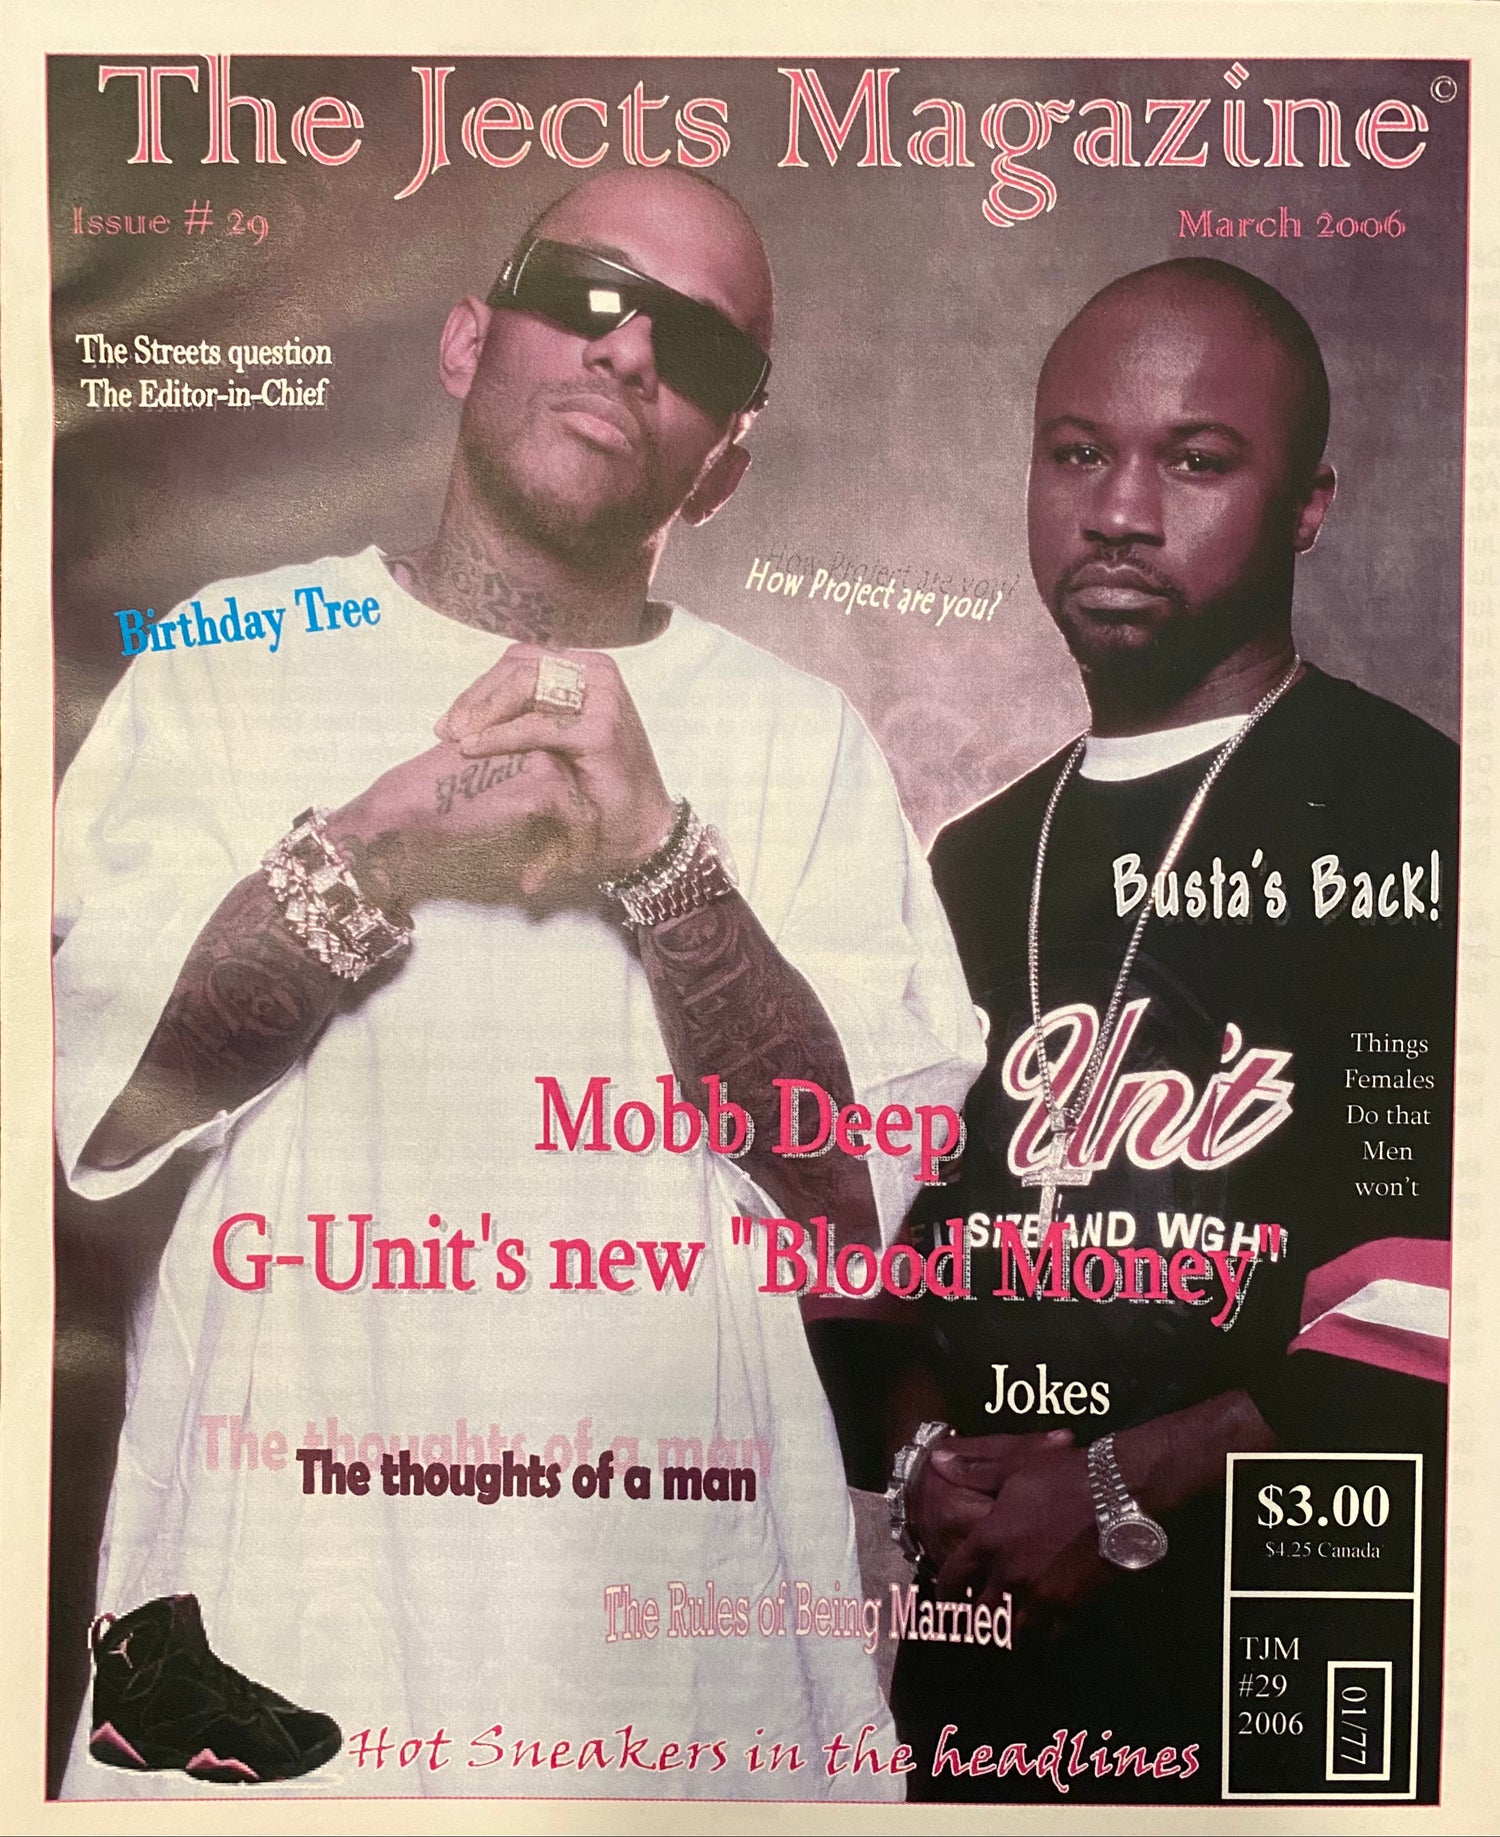 The Jects Magazine Issue 29 Mobb Deep - MoSneaks Shop Online